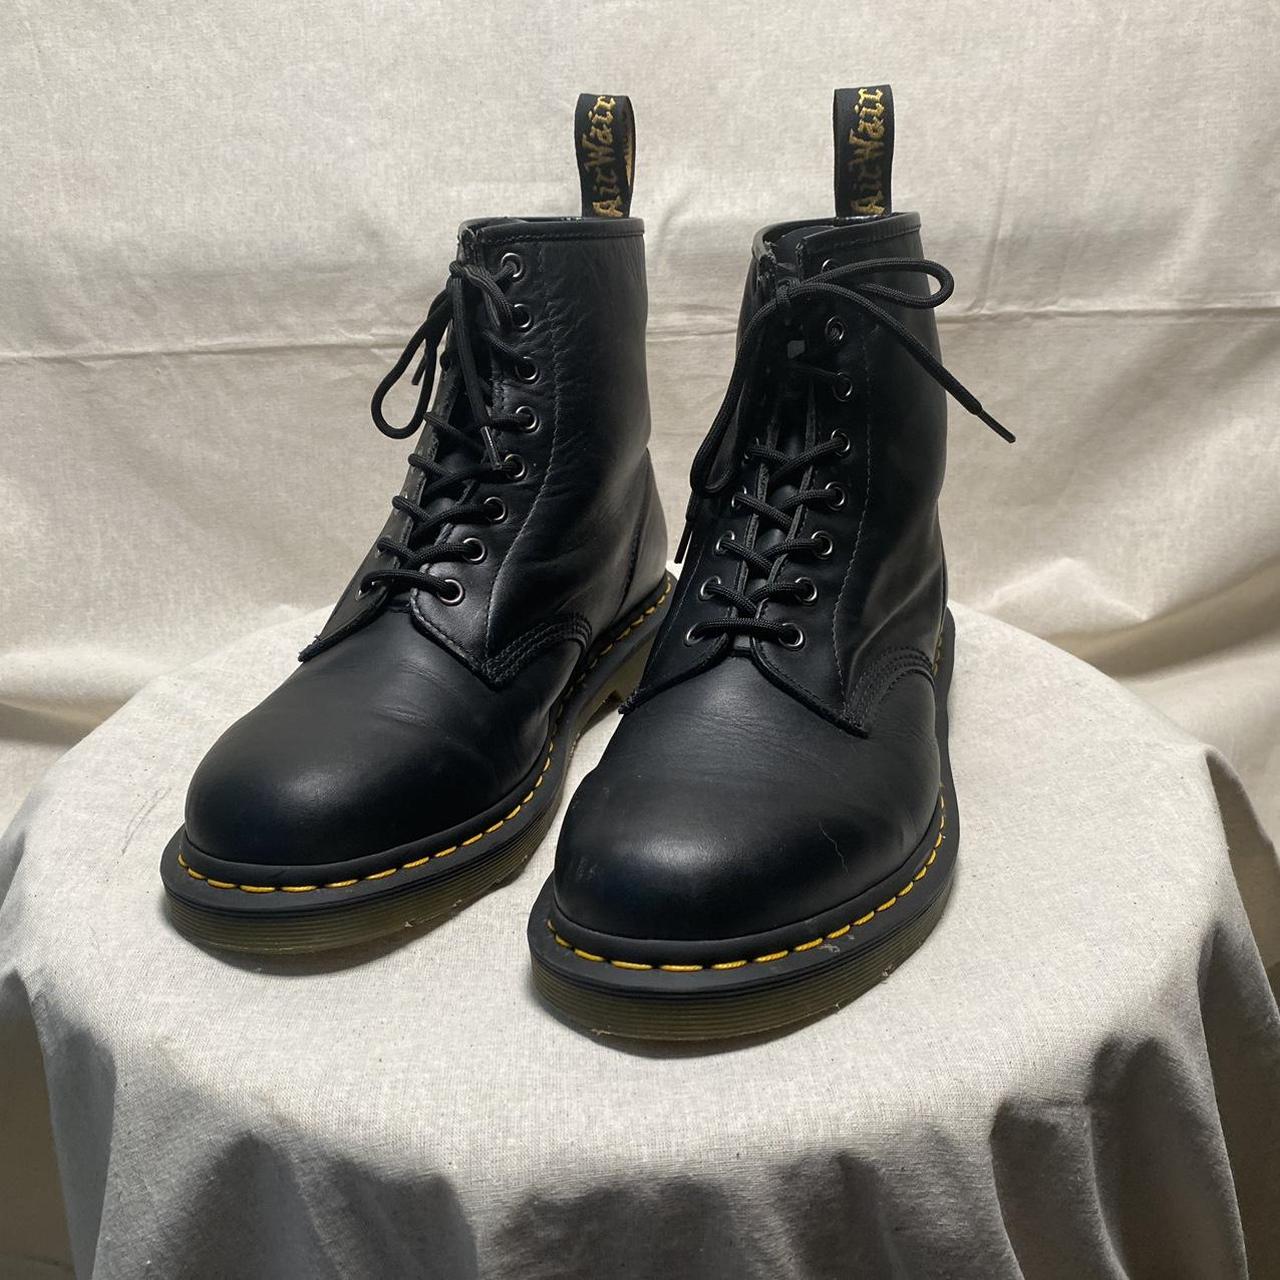 Dr. Martens 1460 Smooth Leather Lace Up Boots - Depop